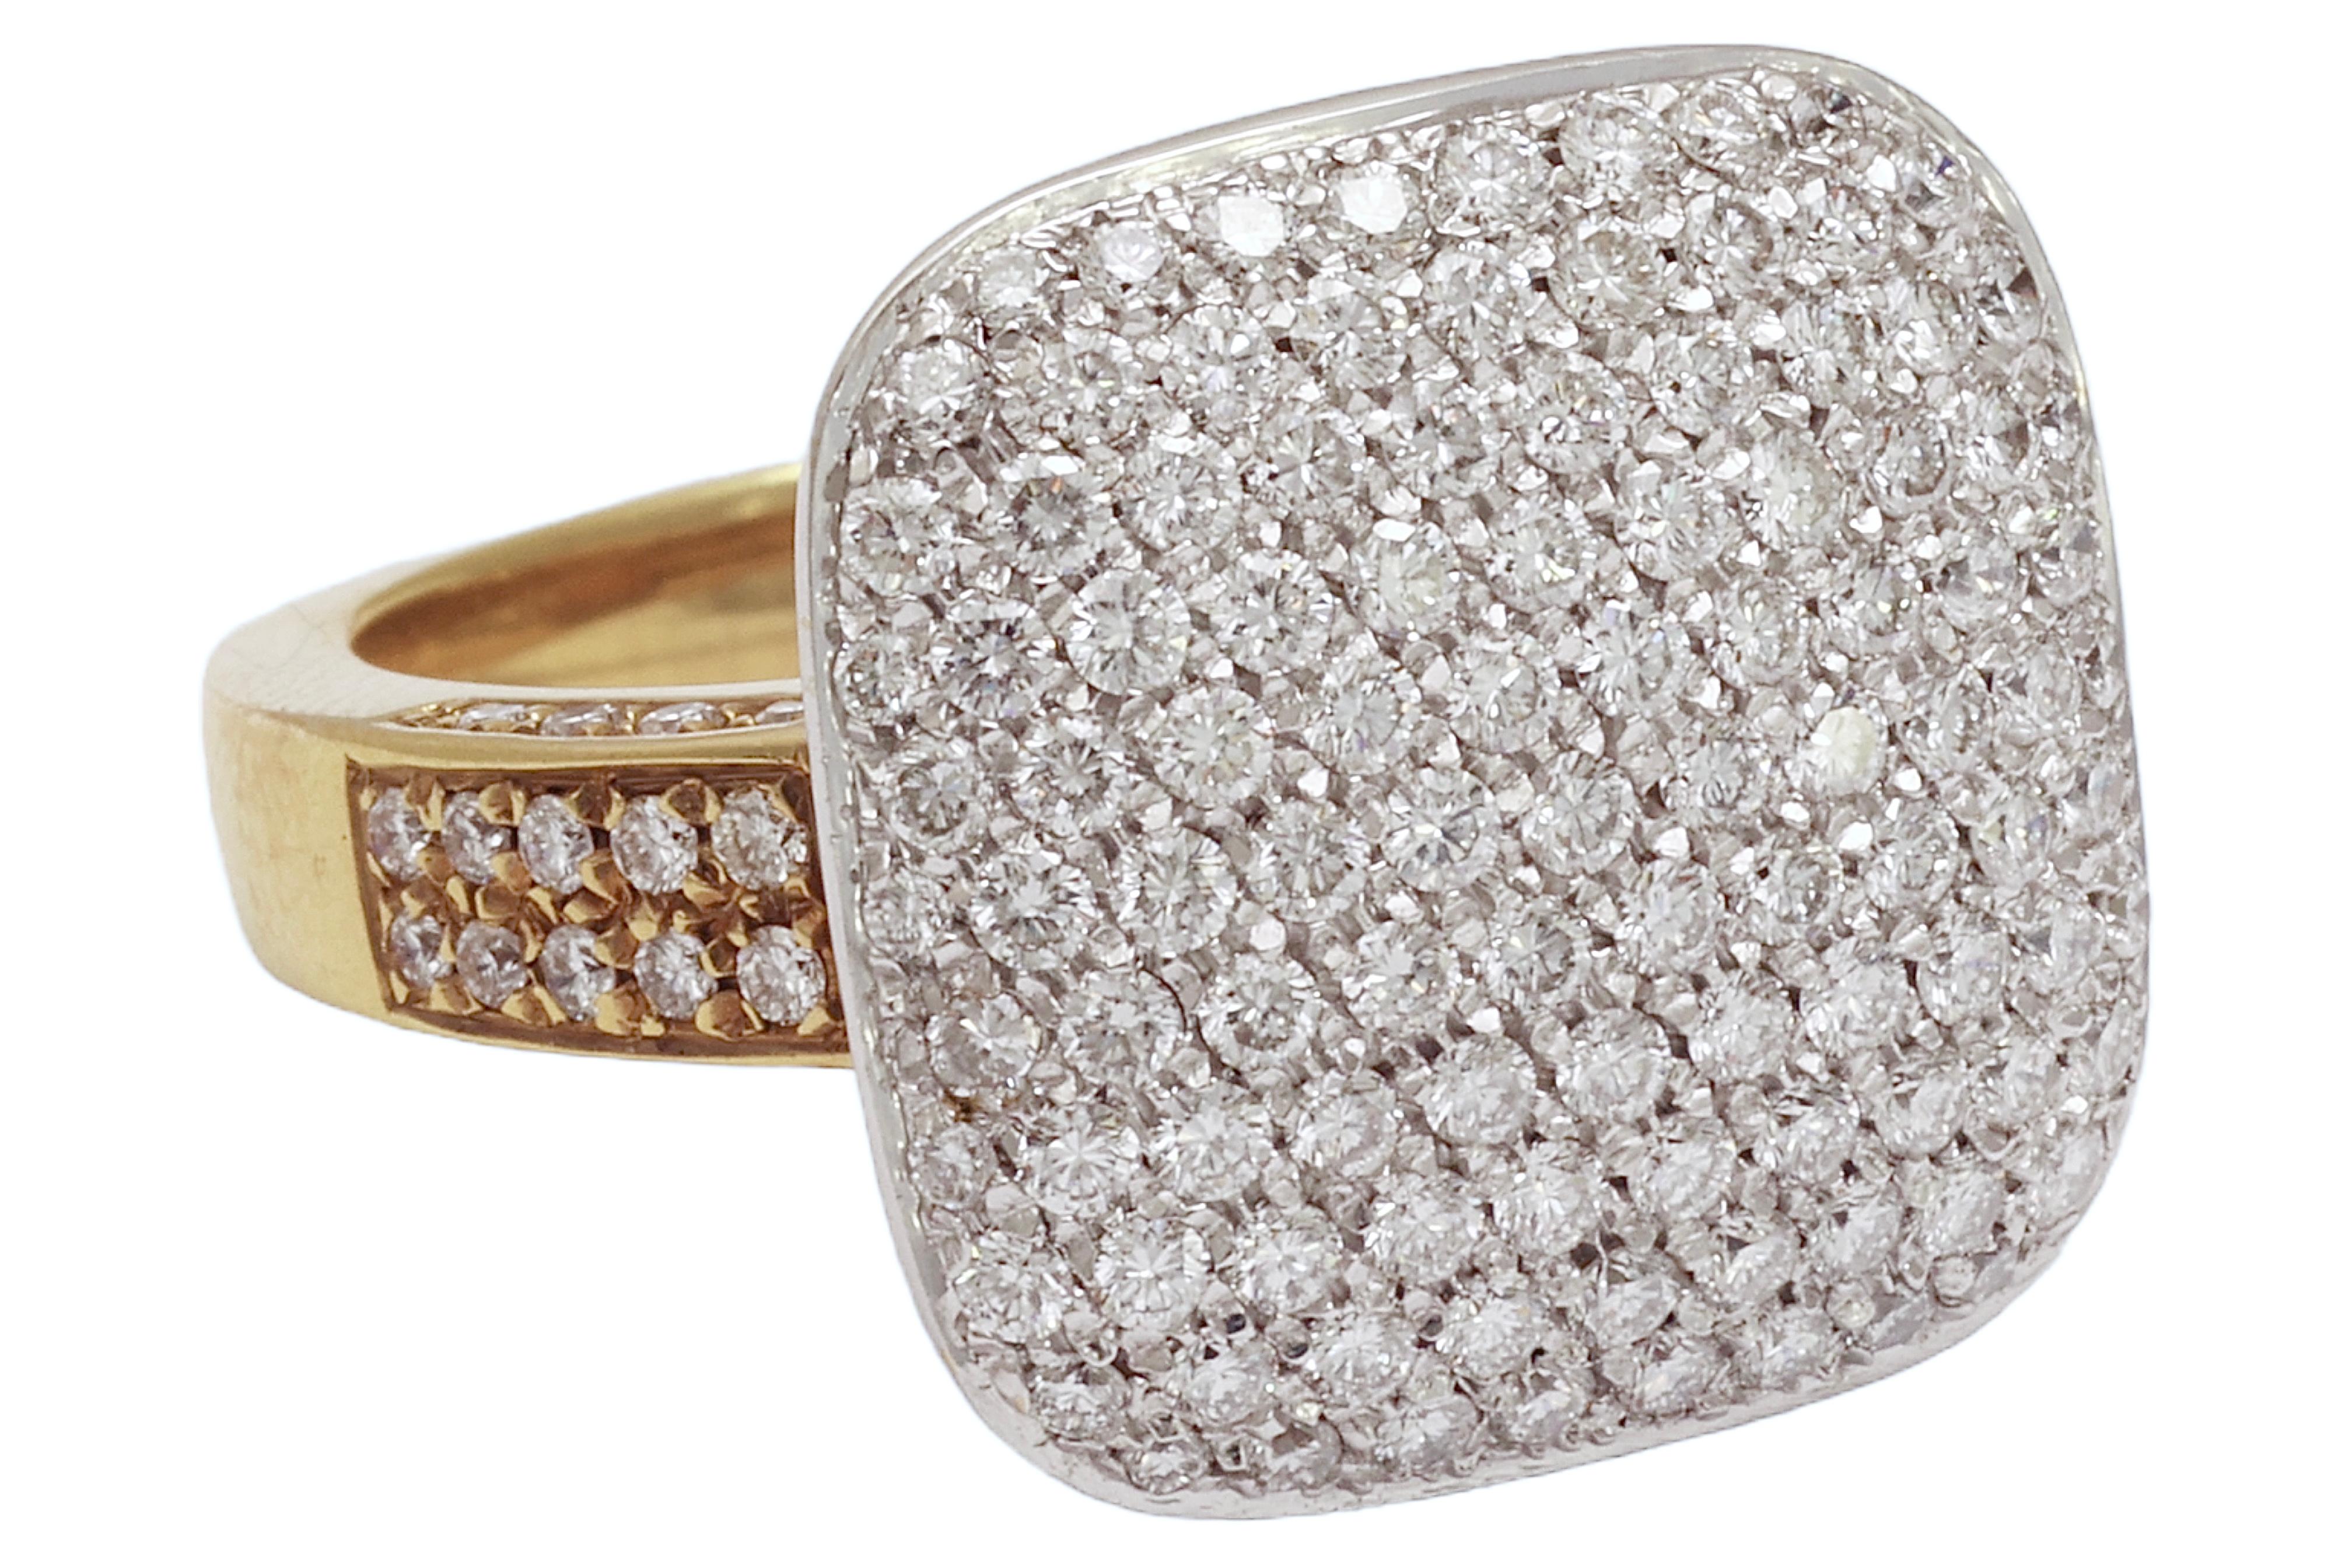 Beautiful 18 kt. Hulchi Belluni Bi color Ring Set with 2.28 ct. Brilliant cut Diamonds 

Diamonds: brilliant cut diamonds together approx. 2.28 ct.

Material: 18 kt. white and yellow gold

Ring size: 53.5 EU / 6.5 US ( can be resized for